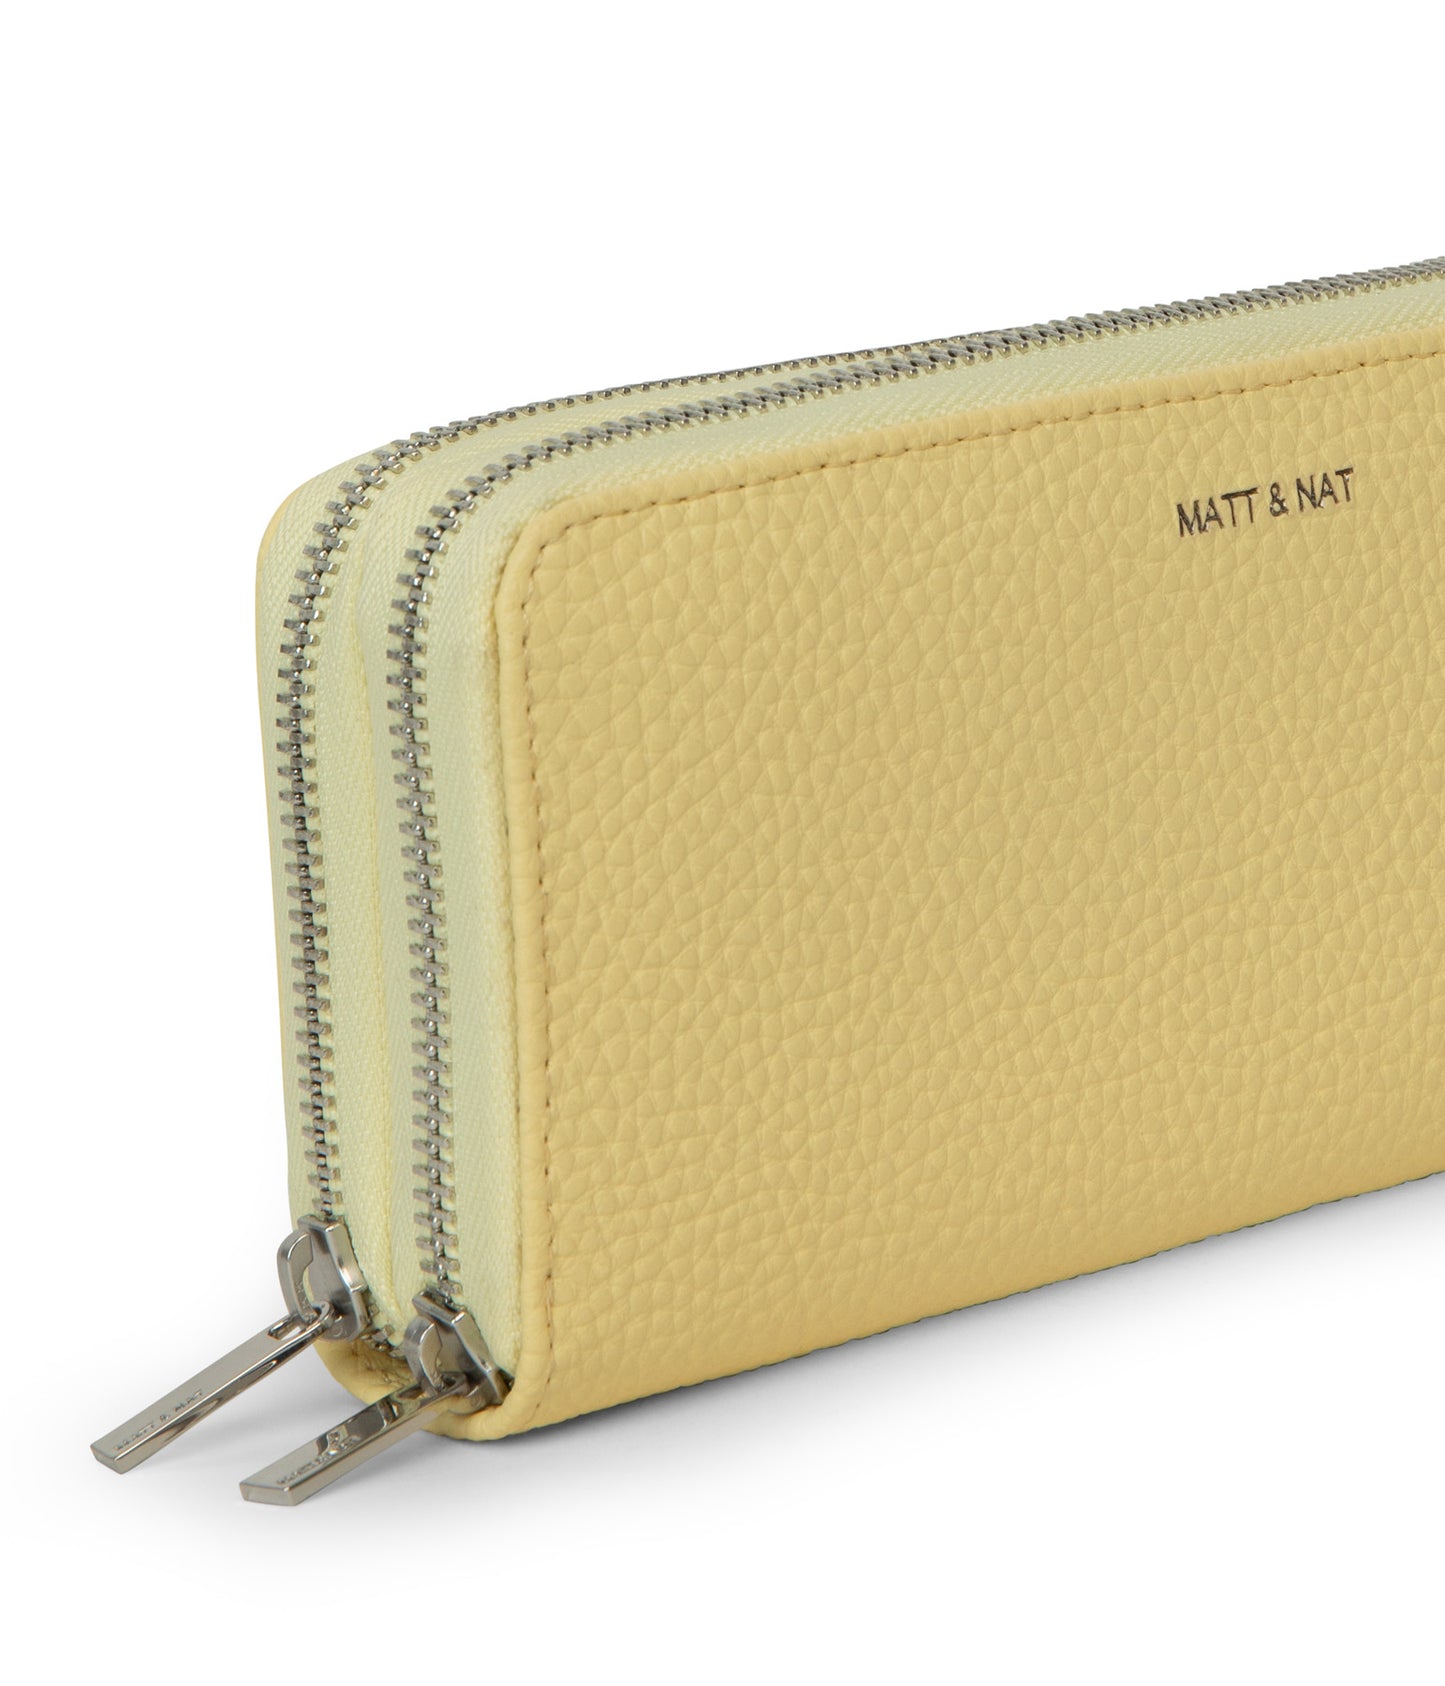 SUBLIME Vegan Wallet - Purity | Color: Yellow - variant::daffodil